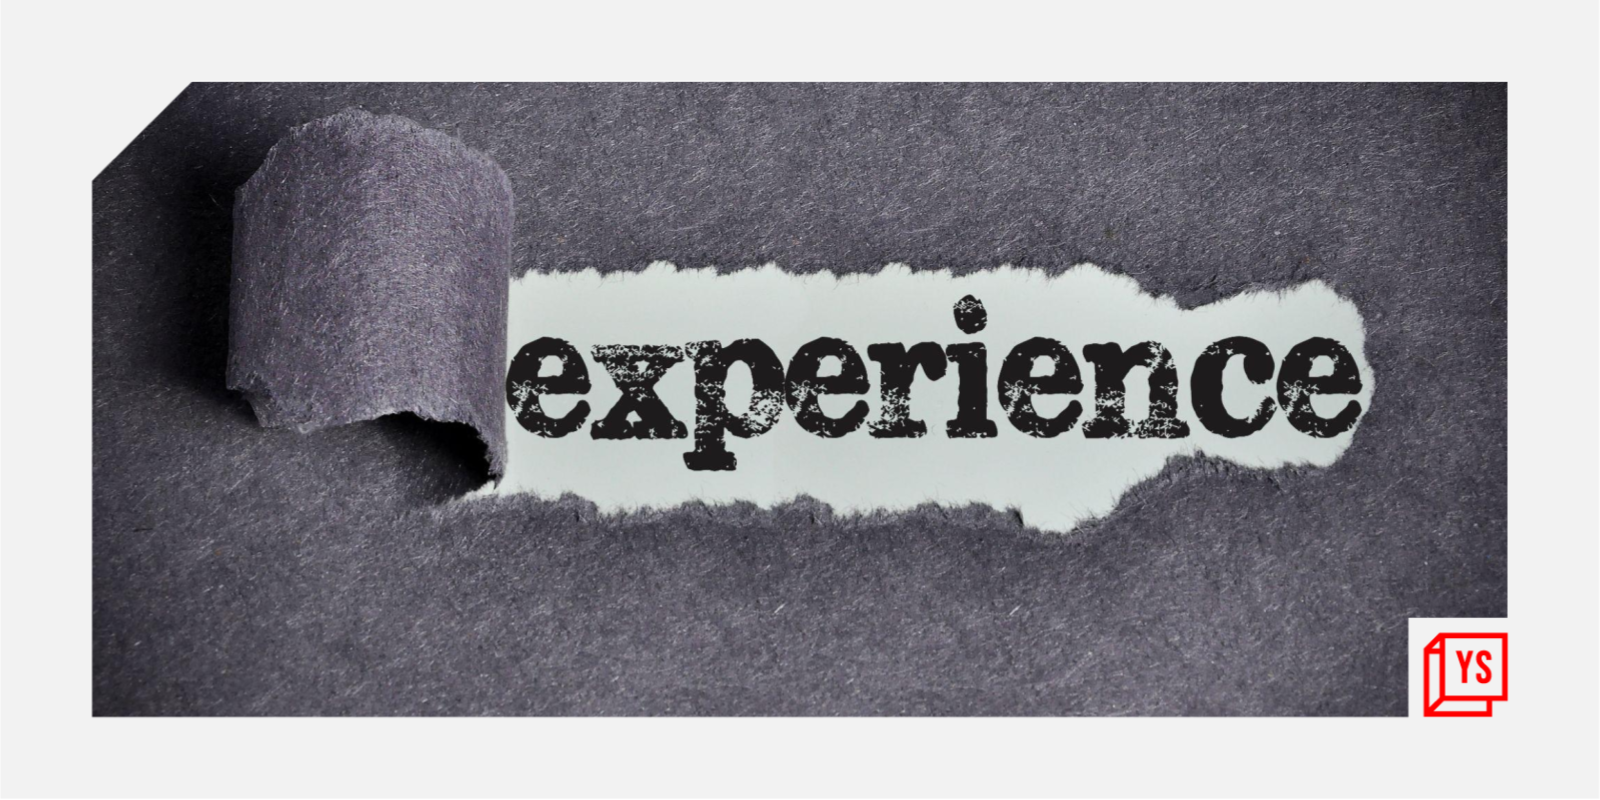 How to leverage employee experience to boost customer experience 

